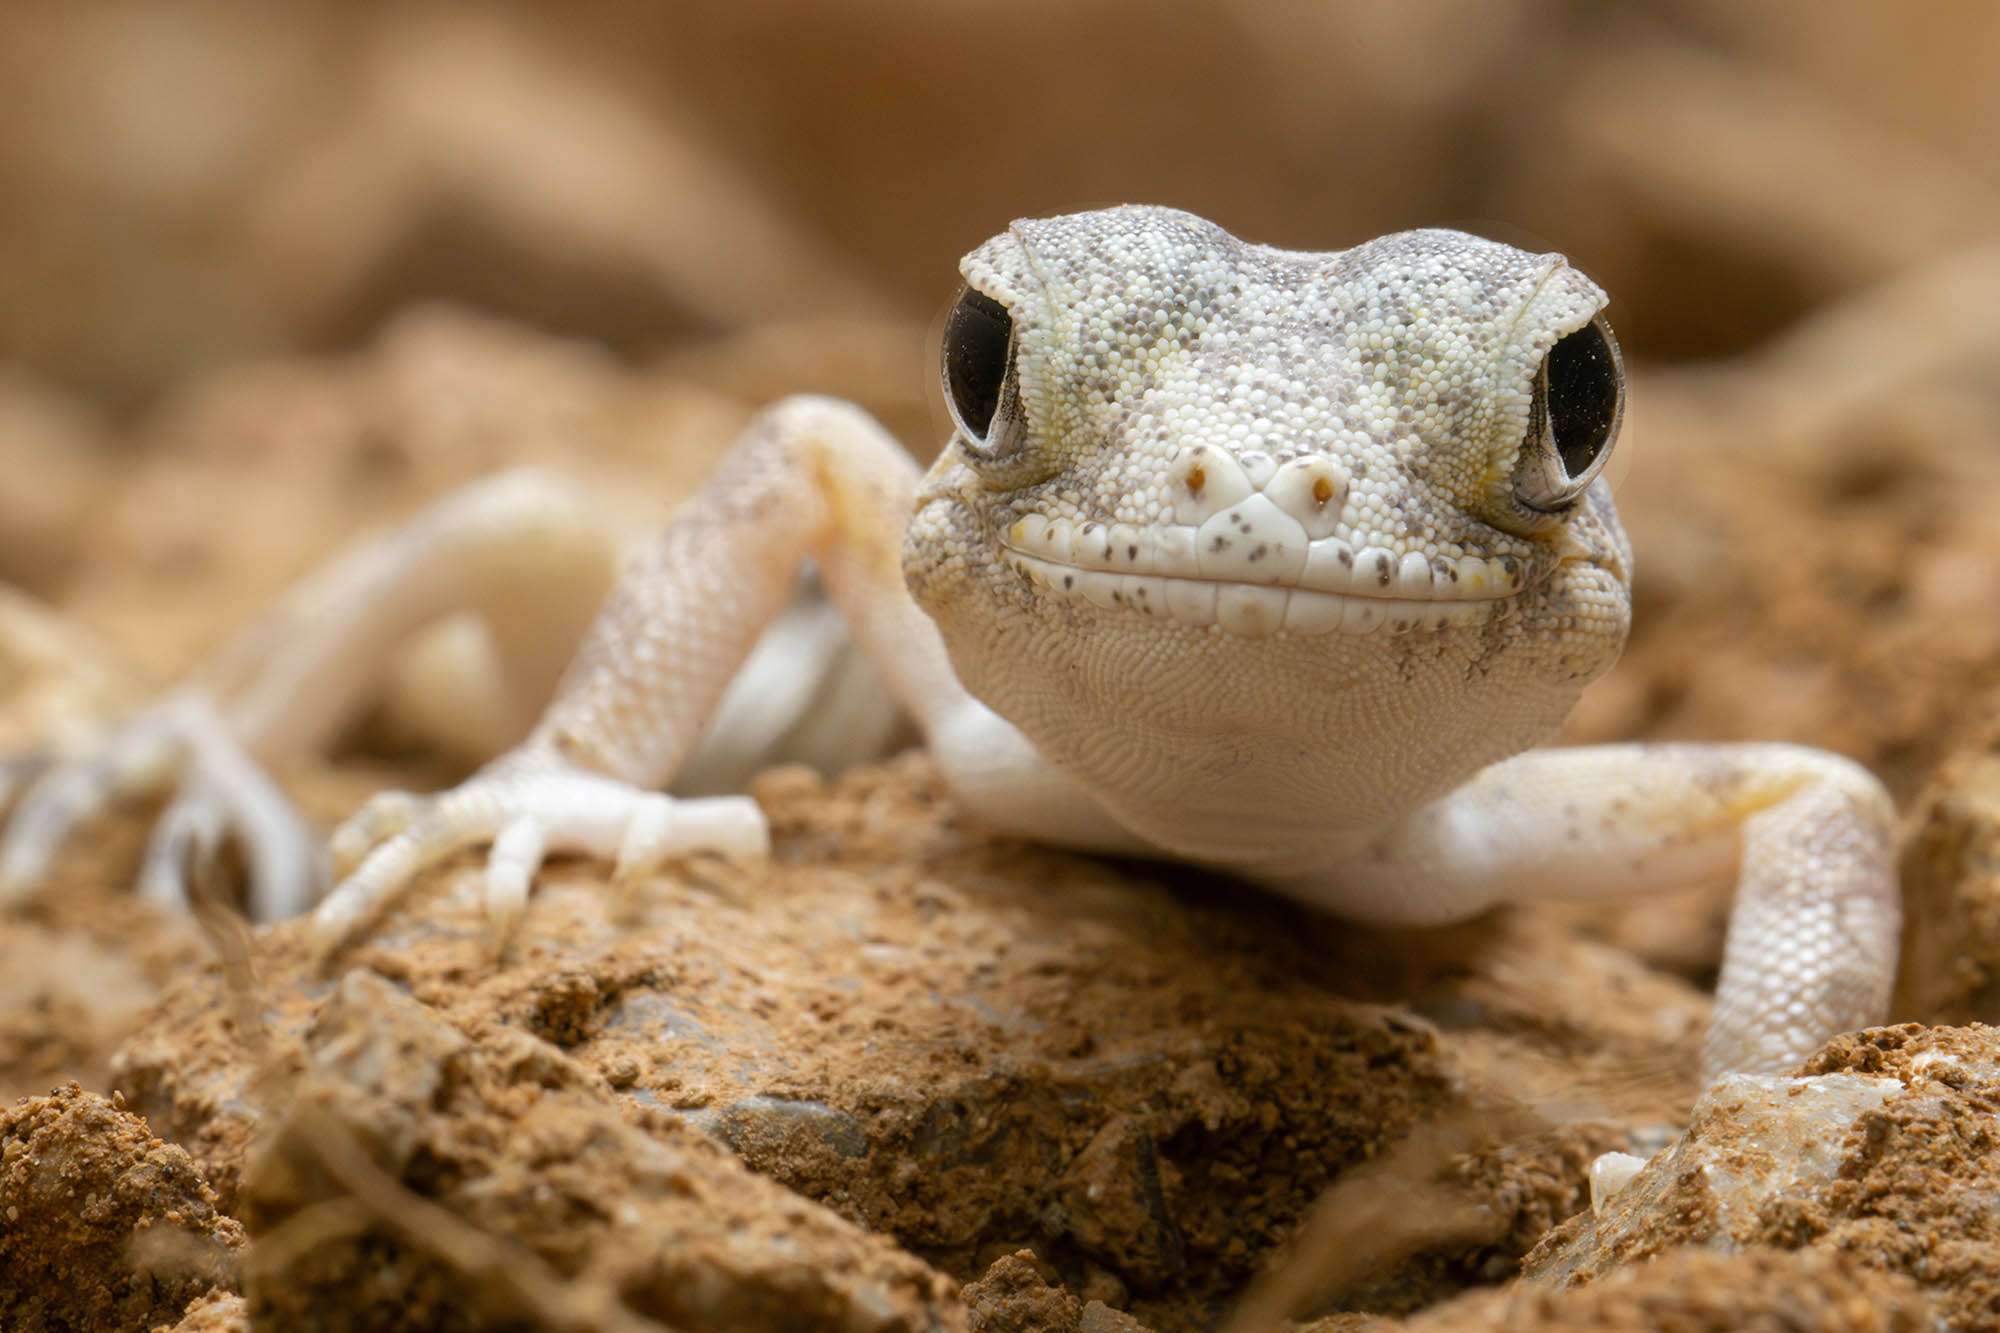 New Home For Rare Trafficked Reptiles